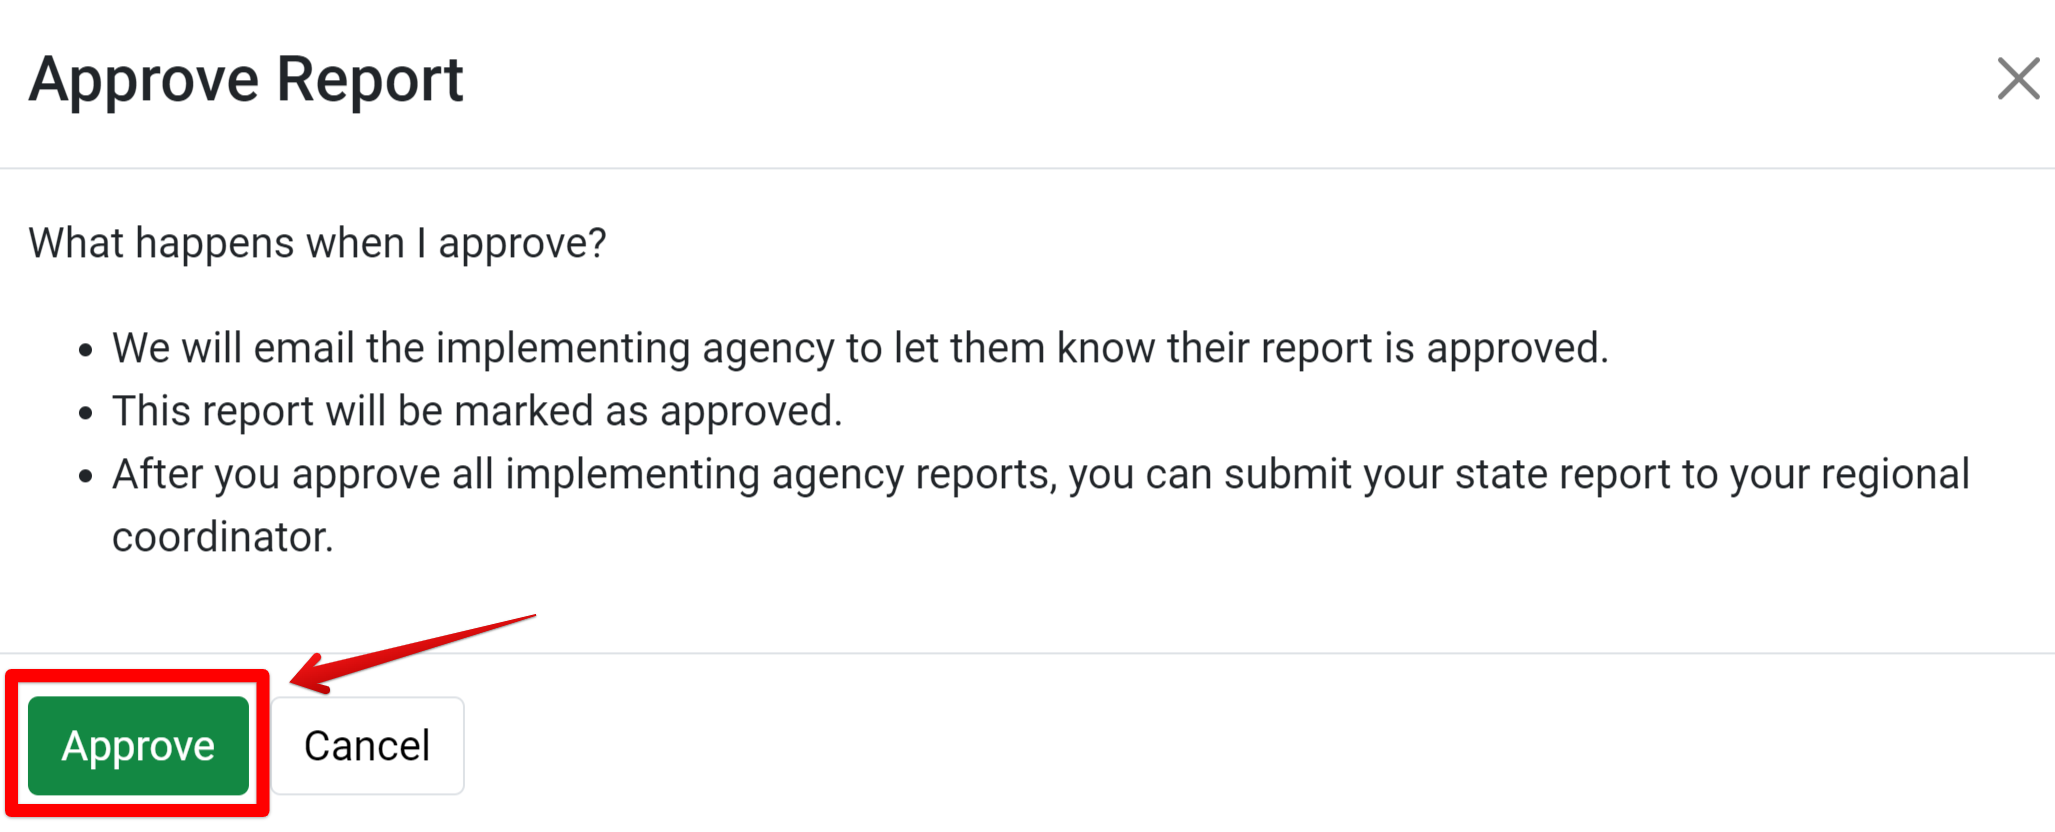 Approve Report Button
